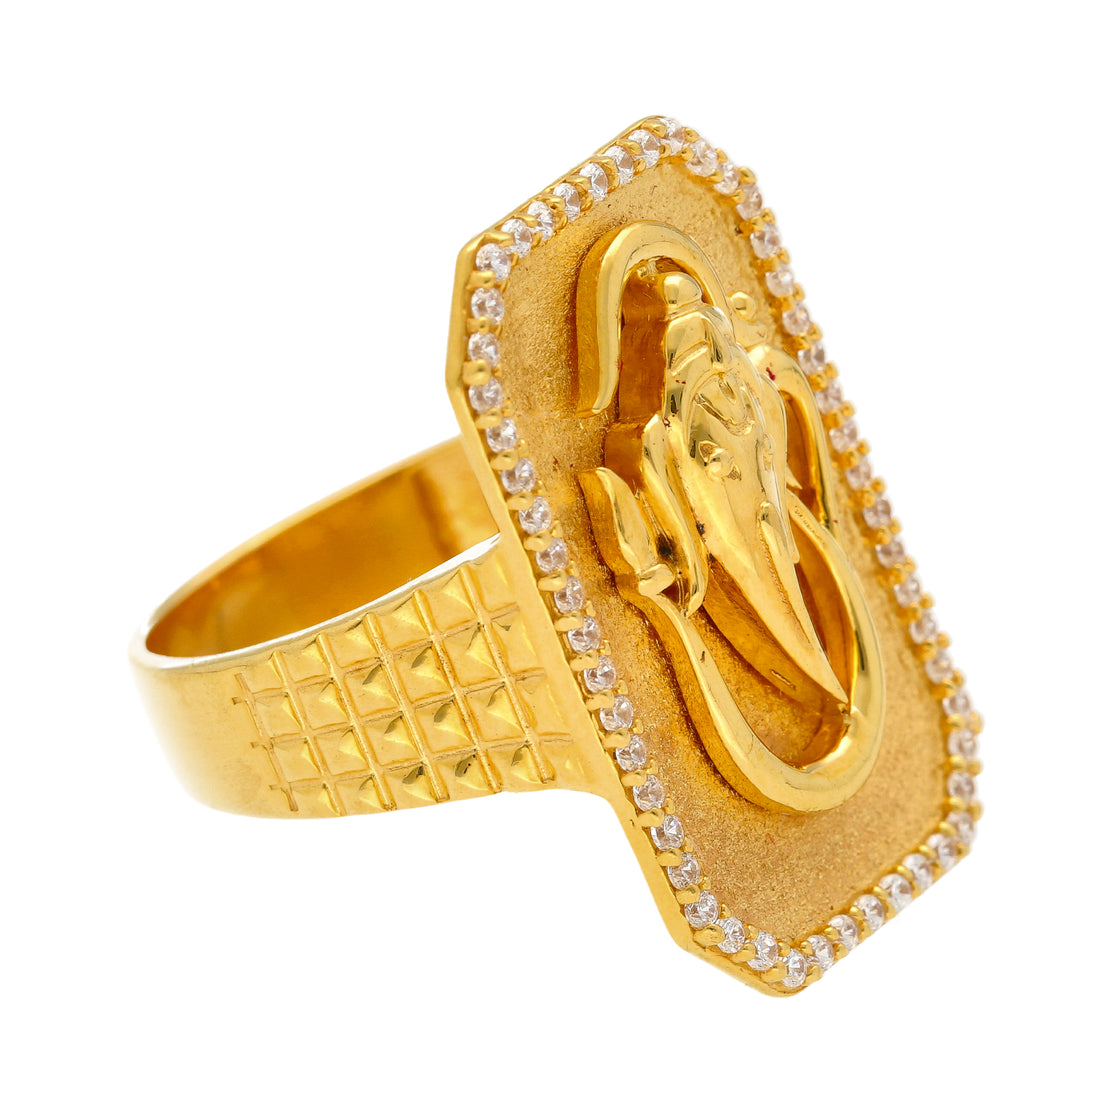 Buy quality 916 GOLD GANESHA PLAIN CASTING GENTS RING in Ahmedabad